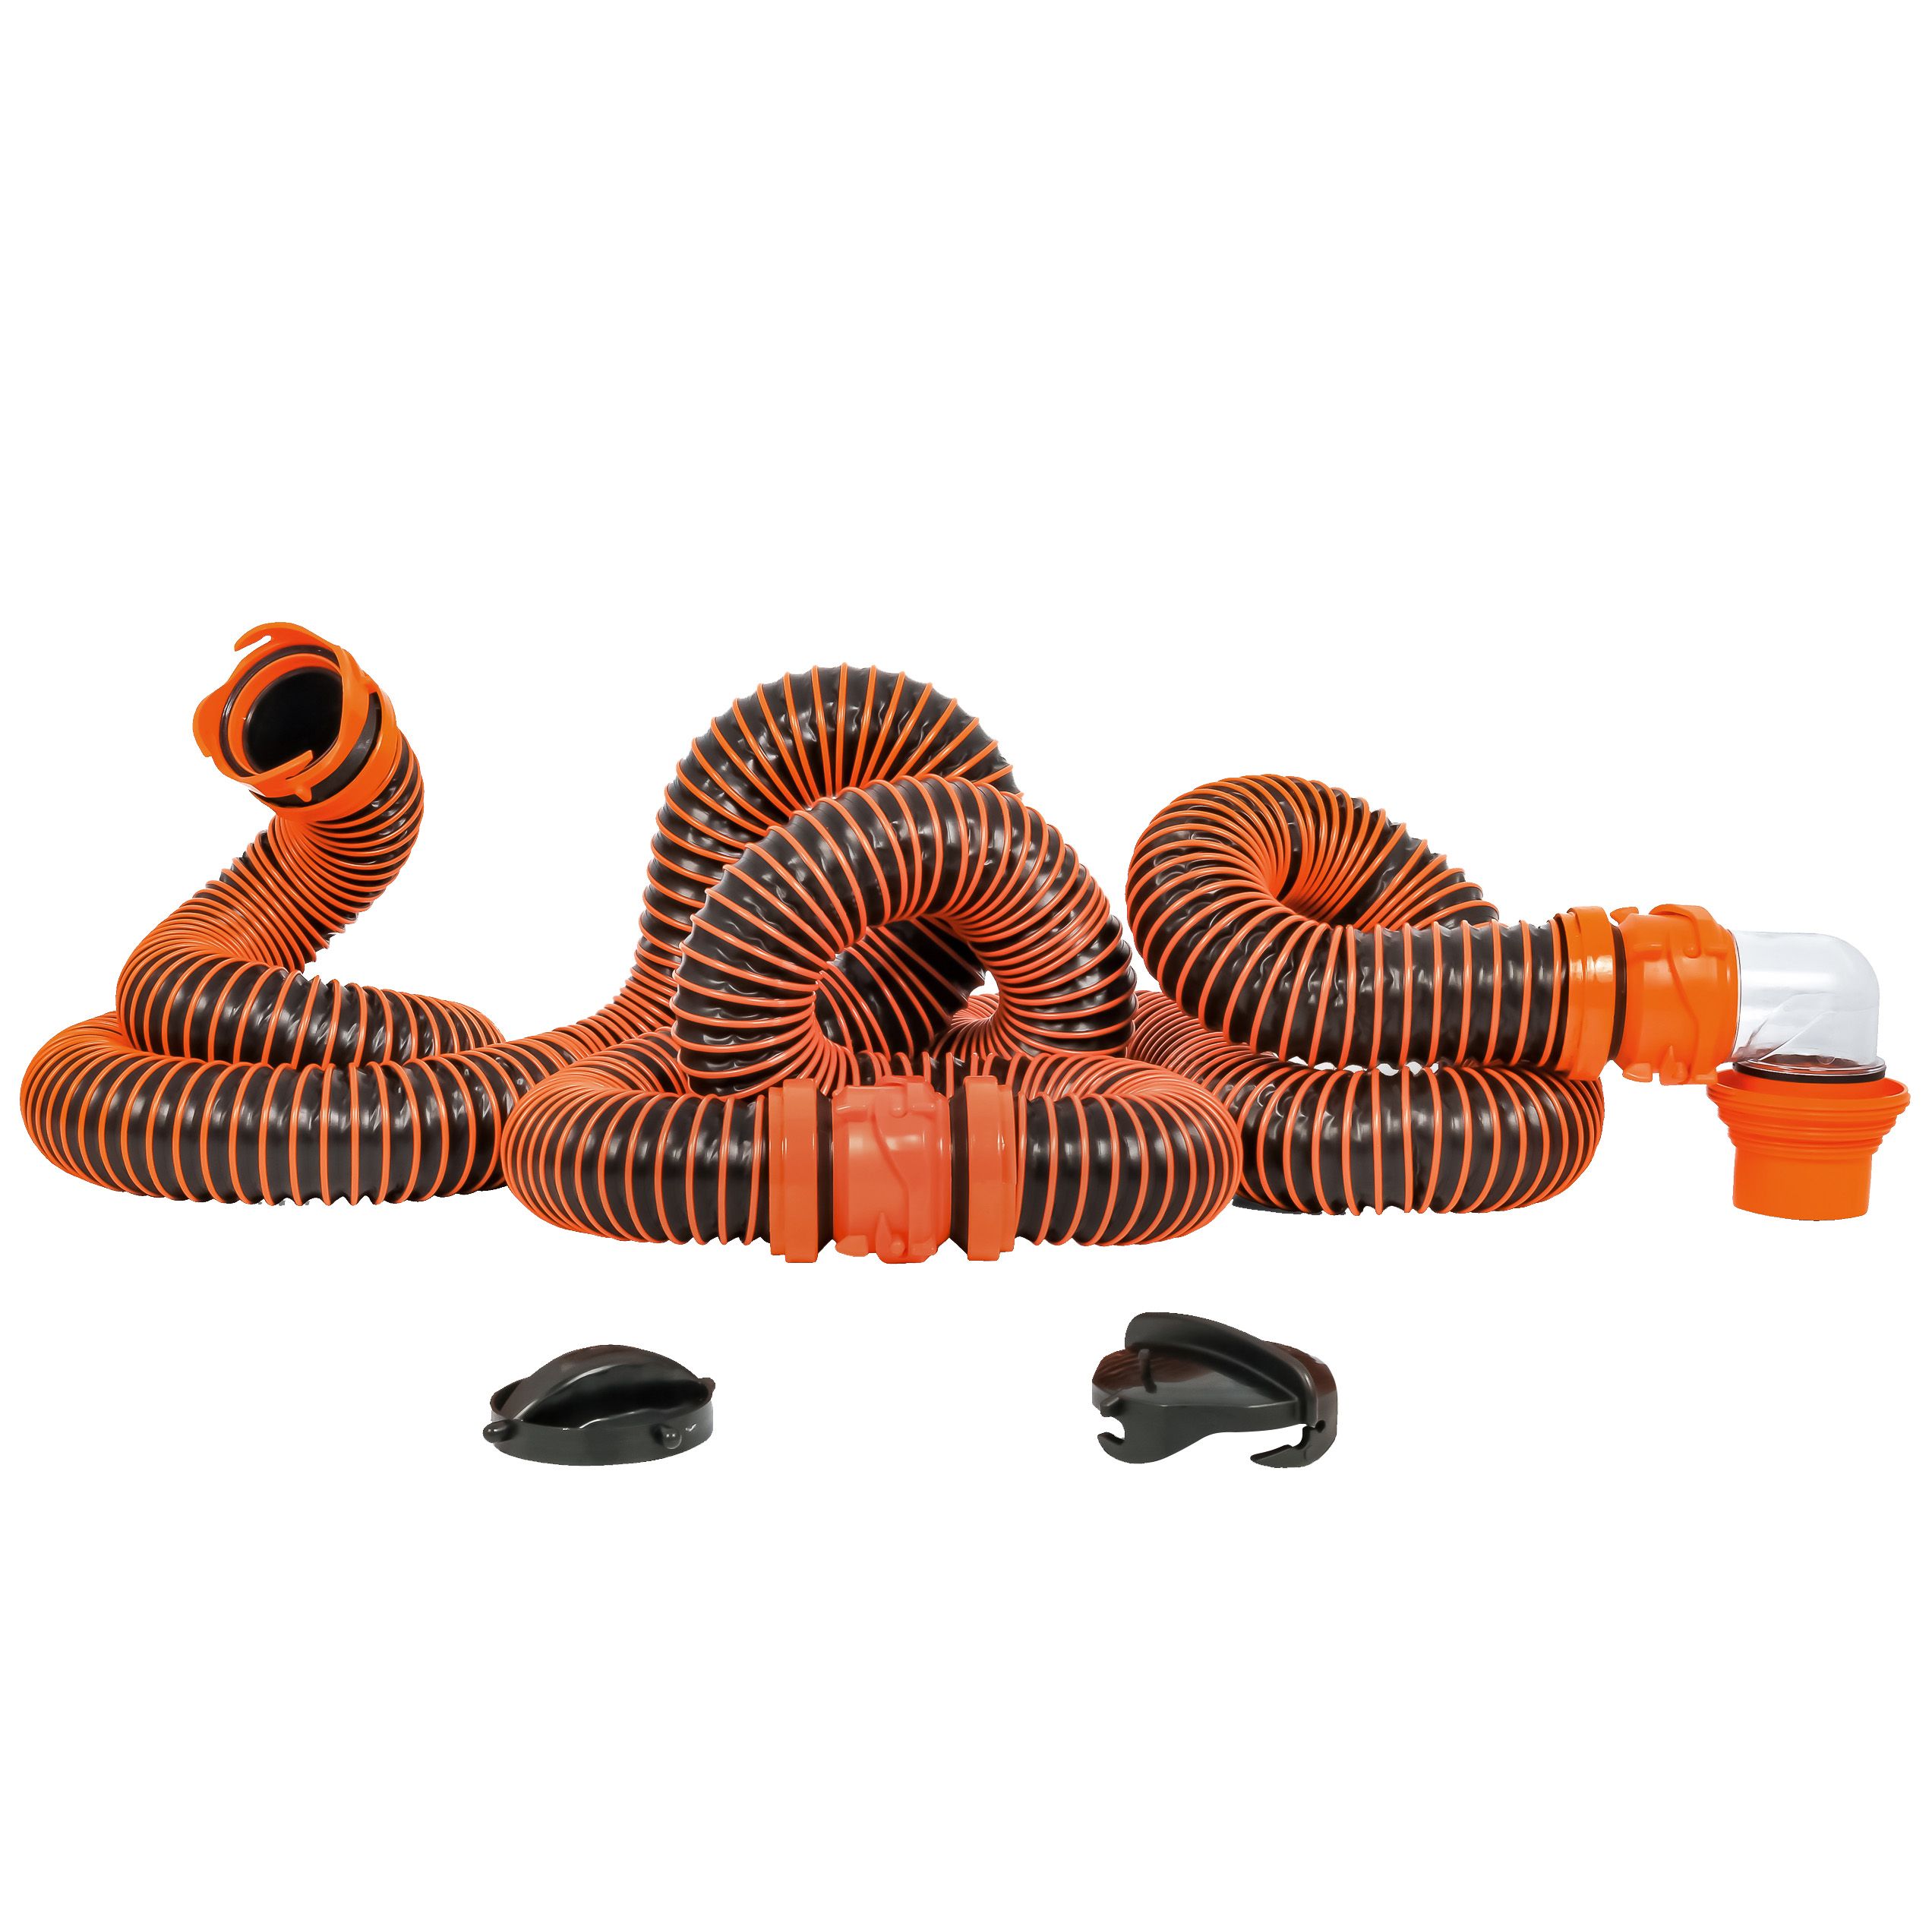 Image 1: Camco RhinoEXTREME 20' Sewer Hose Kit w/4 In 1 Elbow Caps